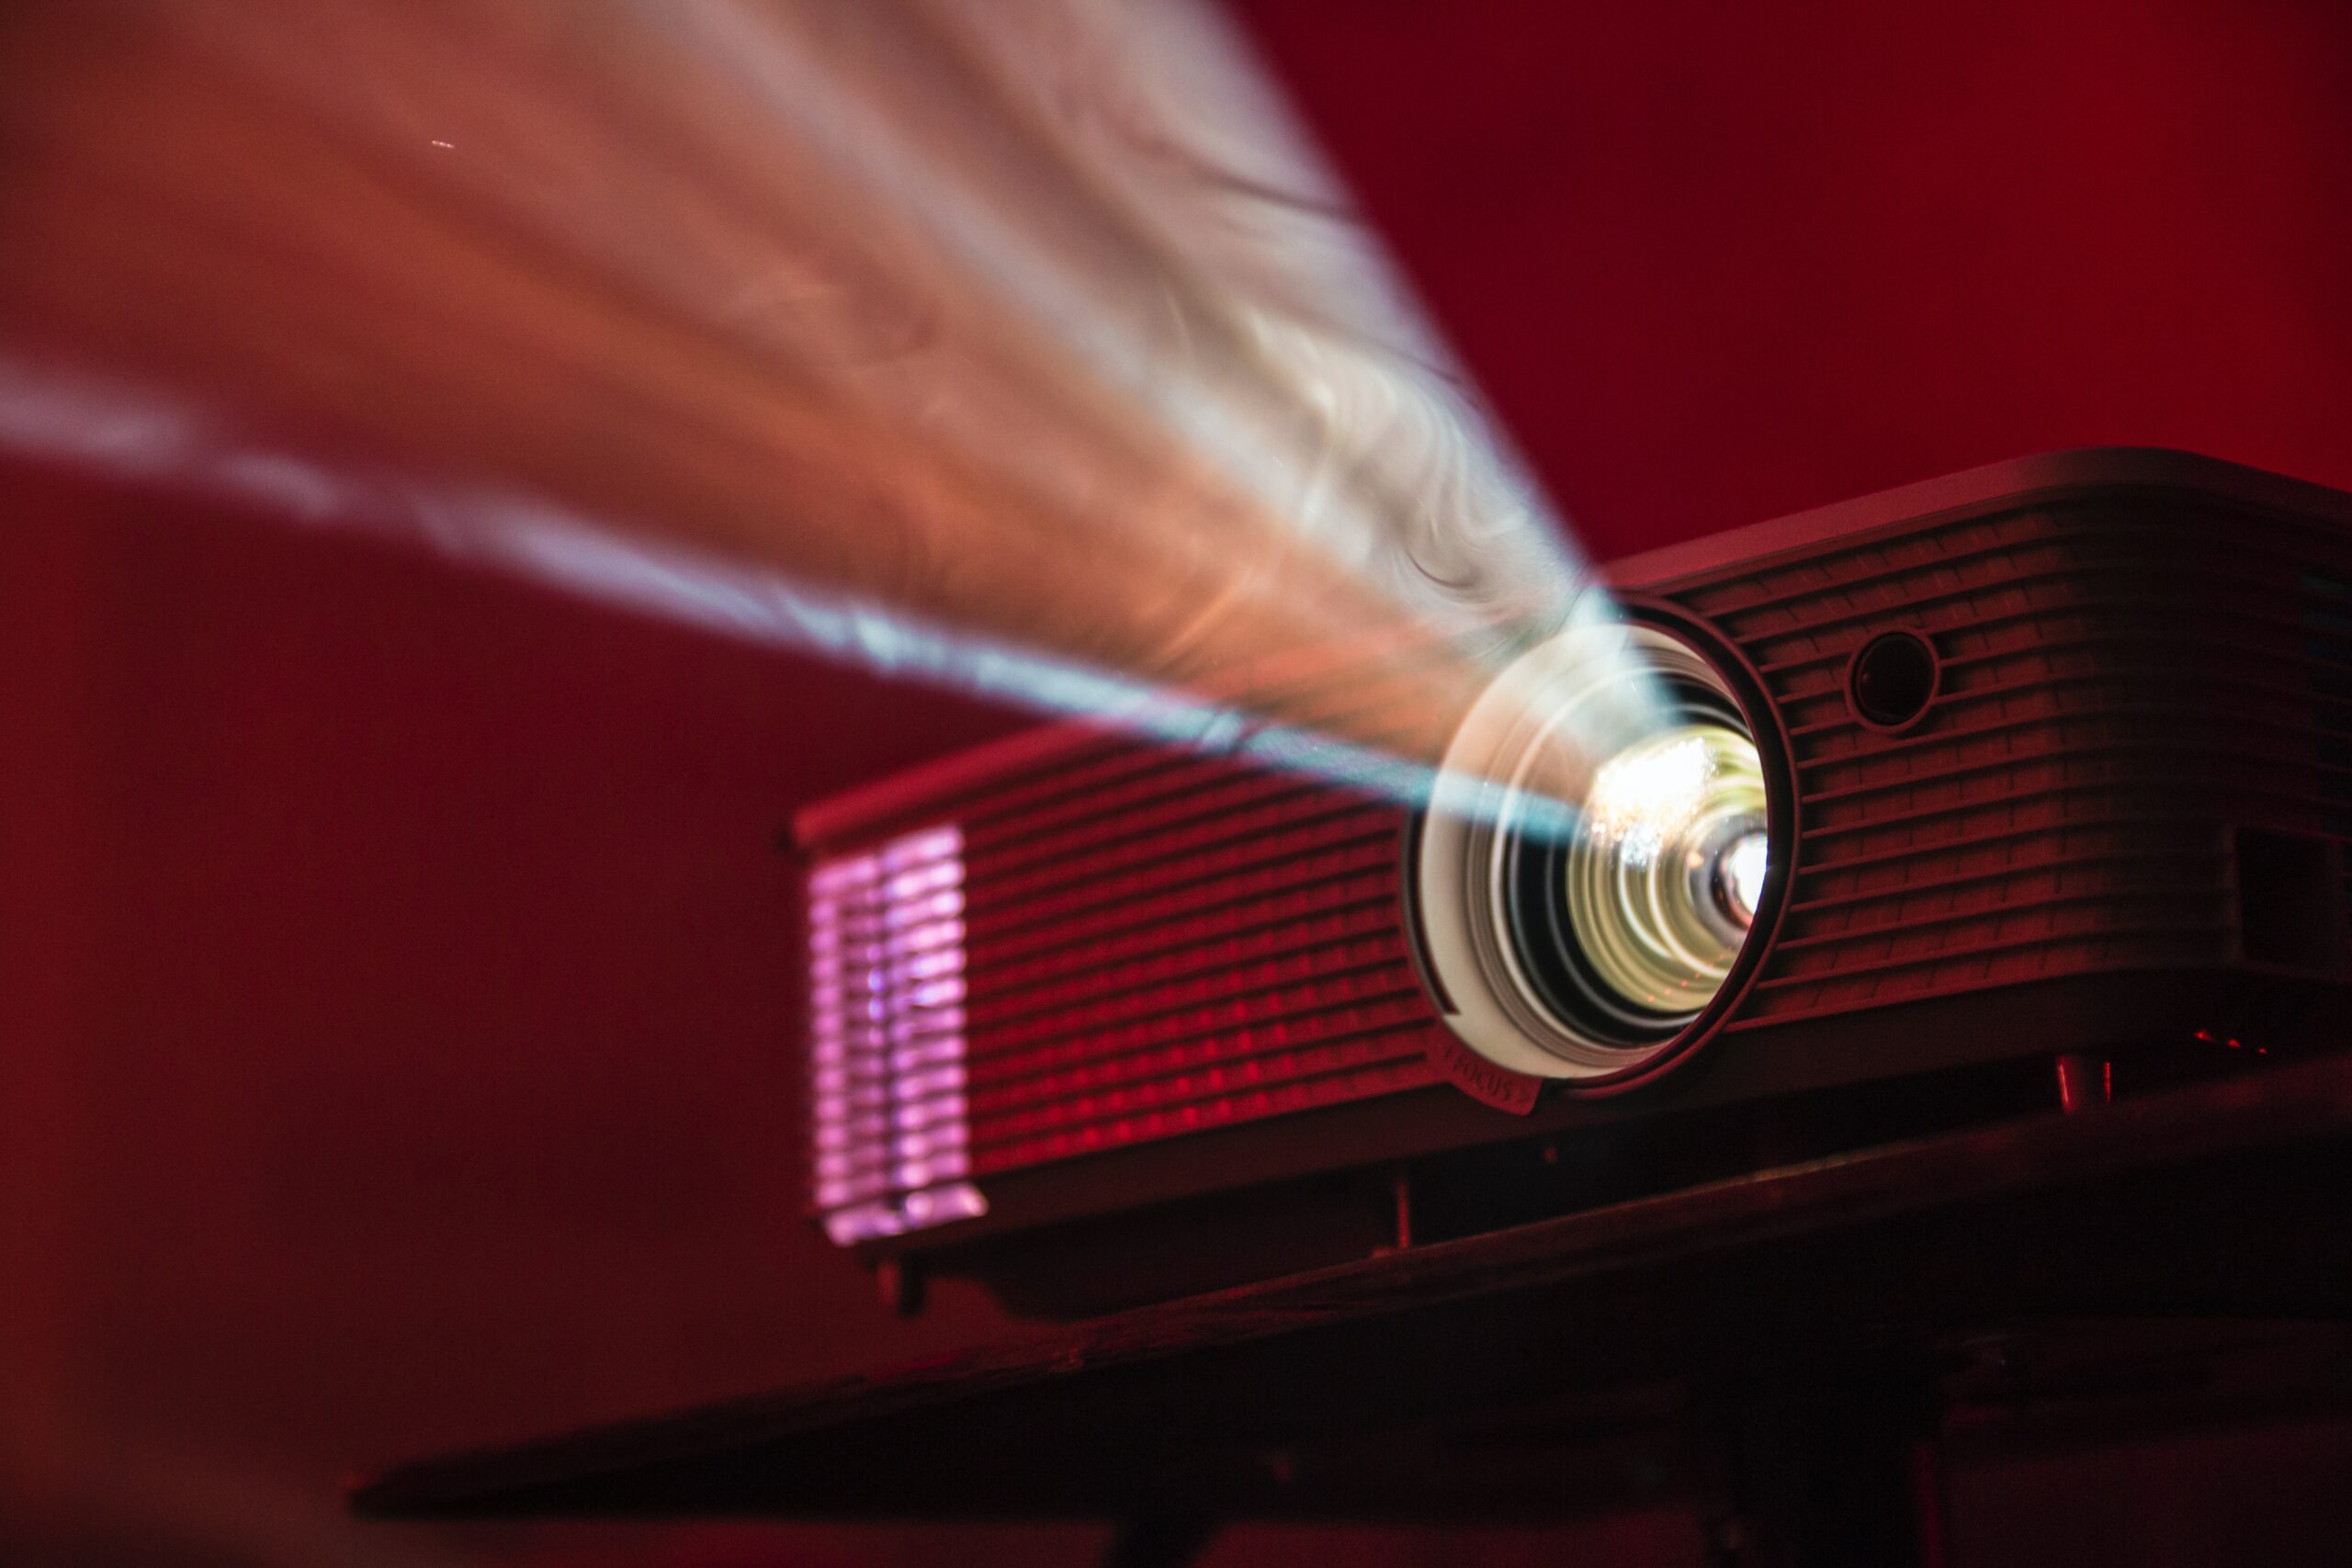 How to Choose the Right Projection System for Your Home Theater